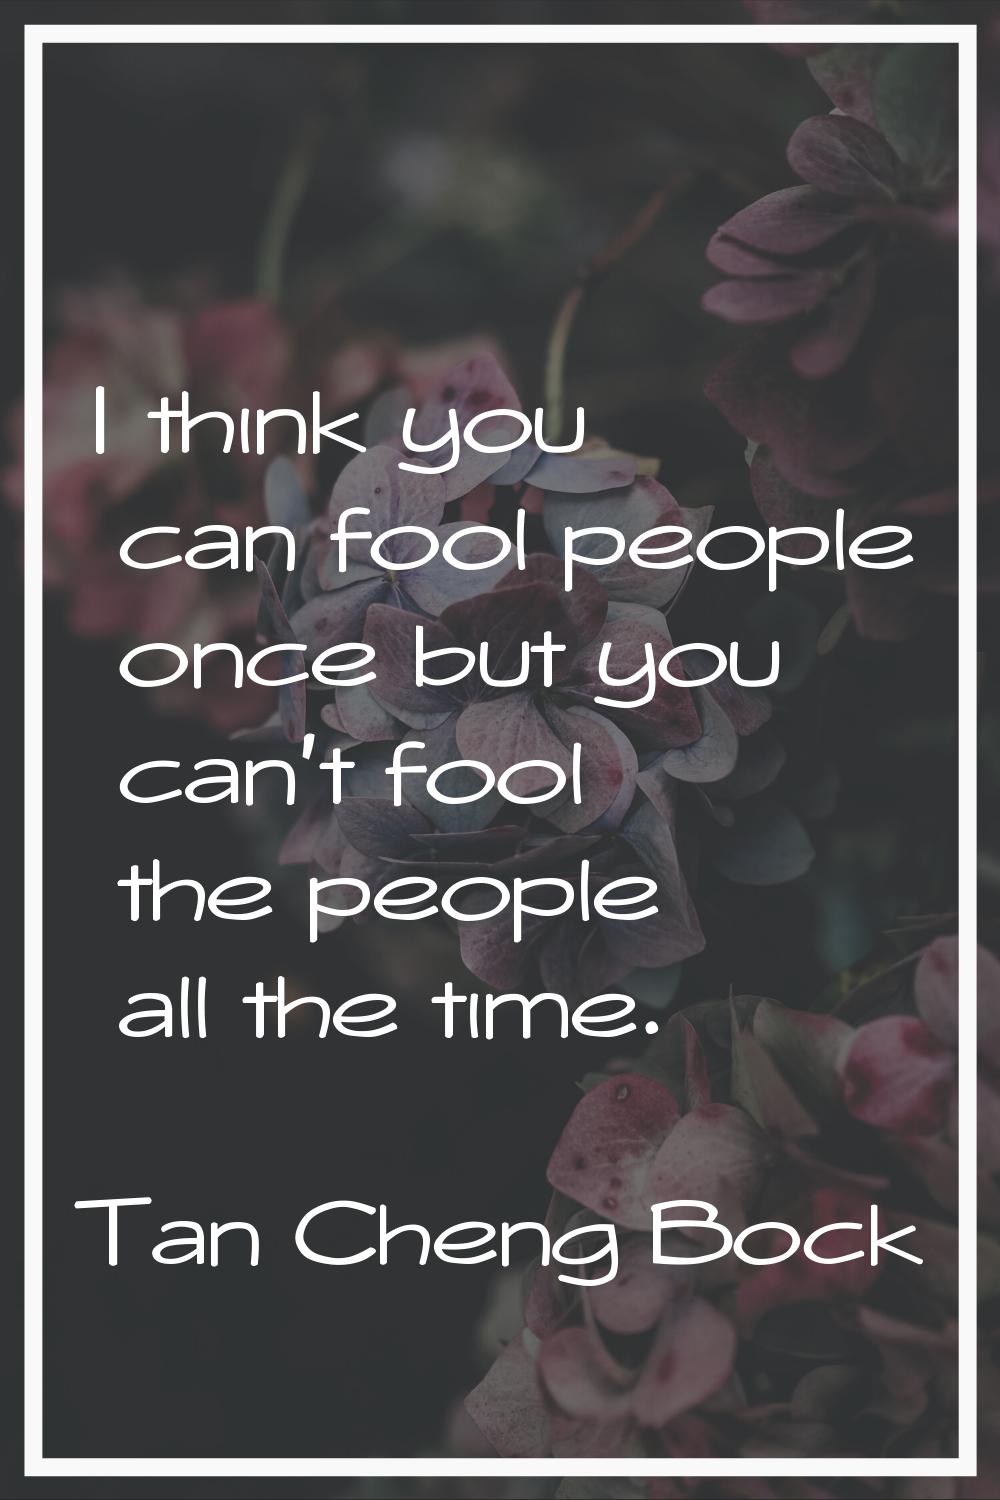 I think you can fool people once but you can't fool the people all the time.